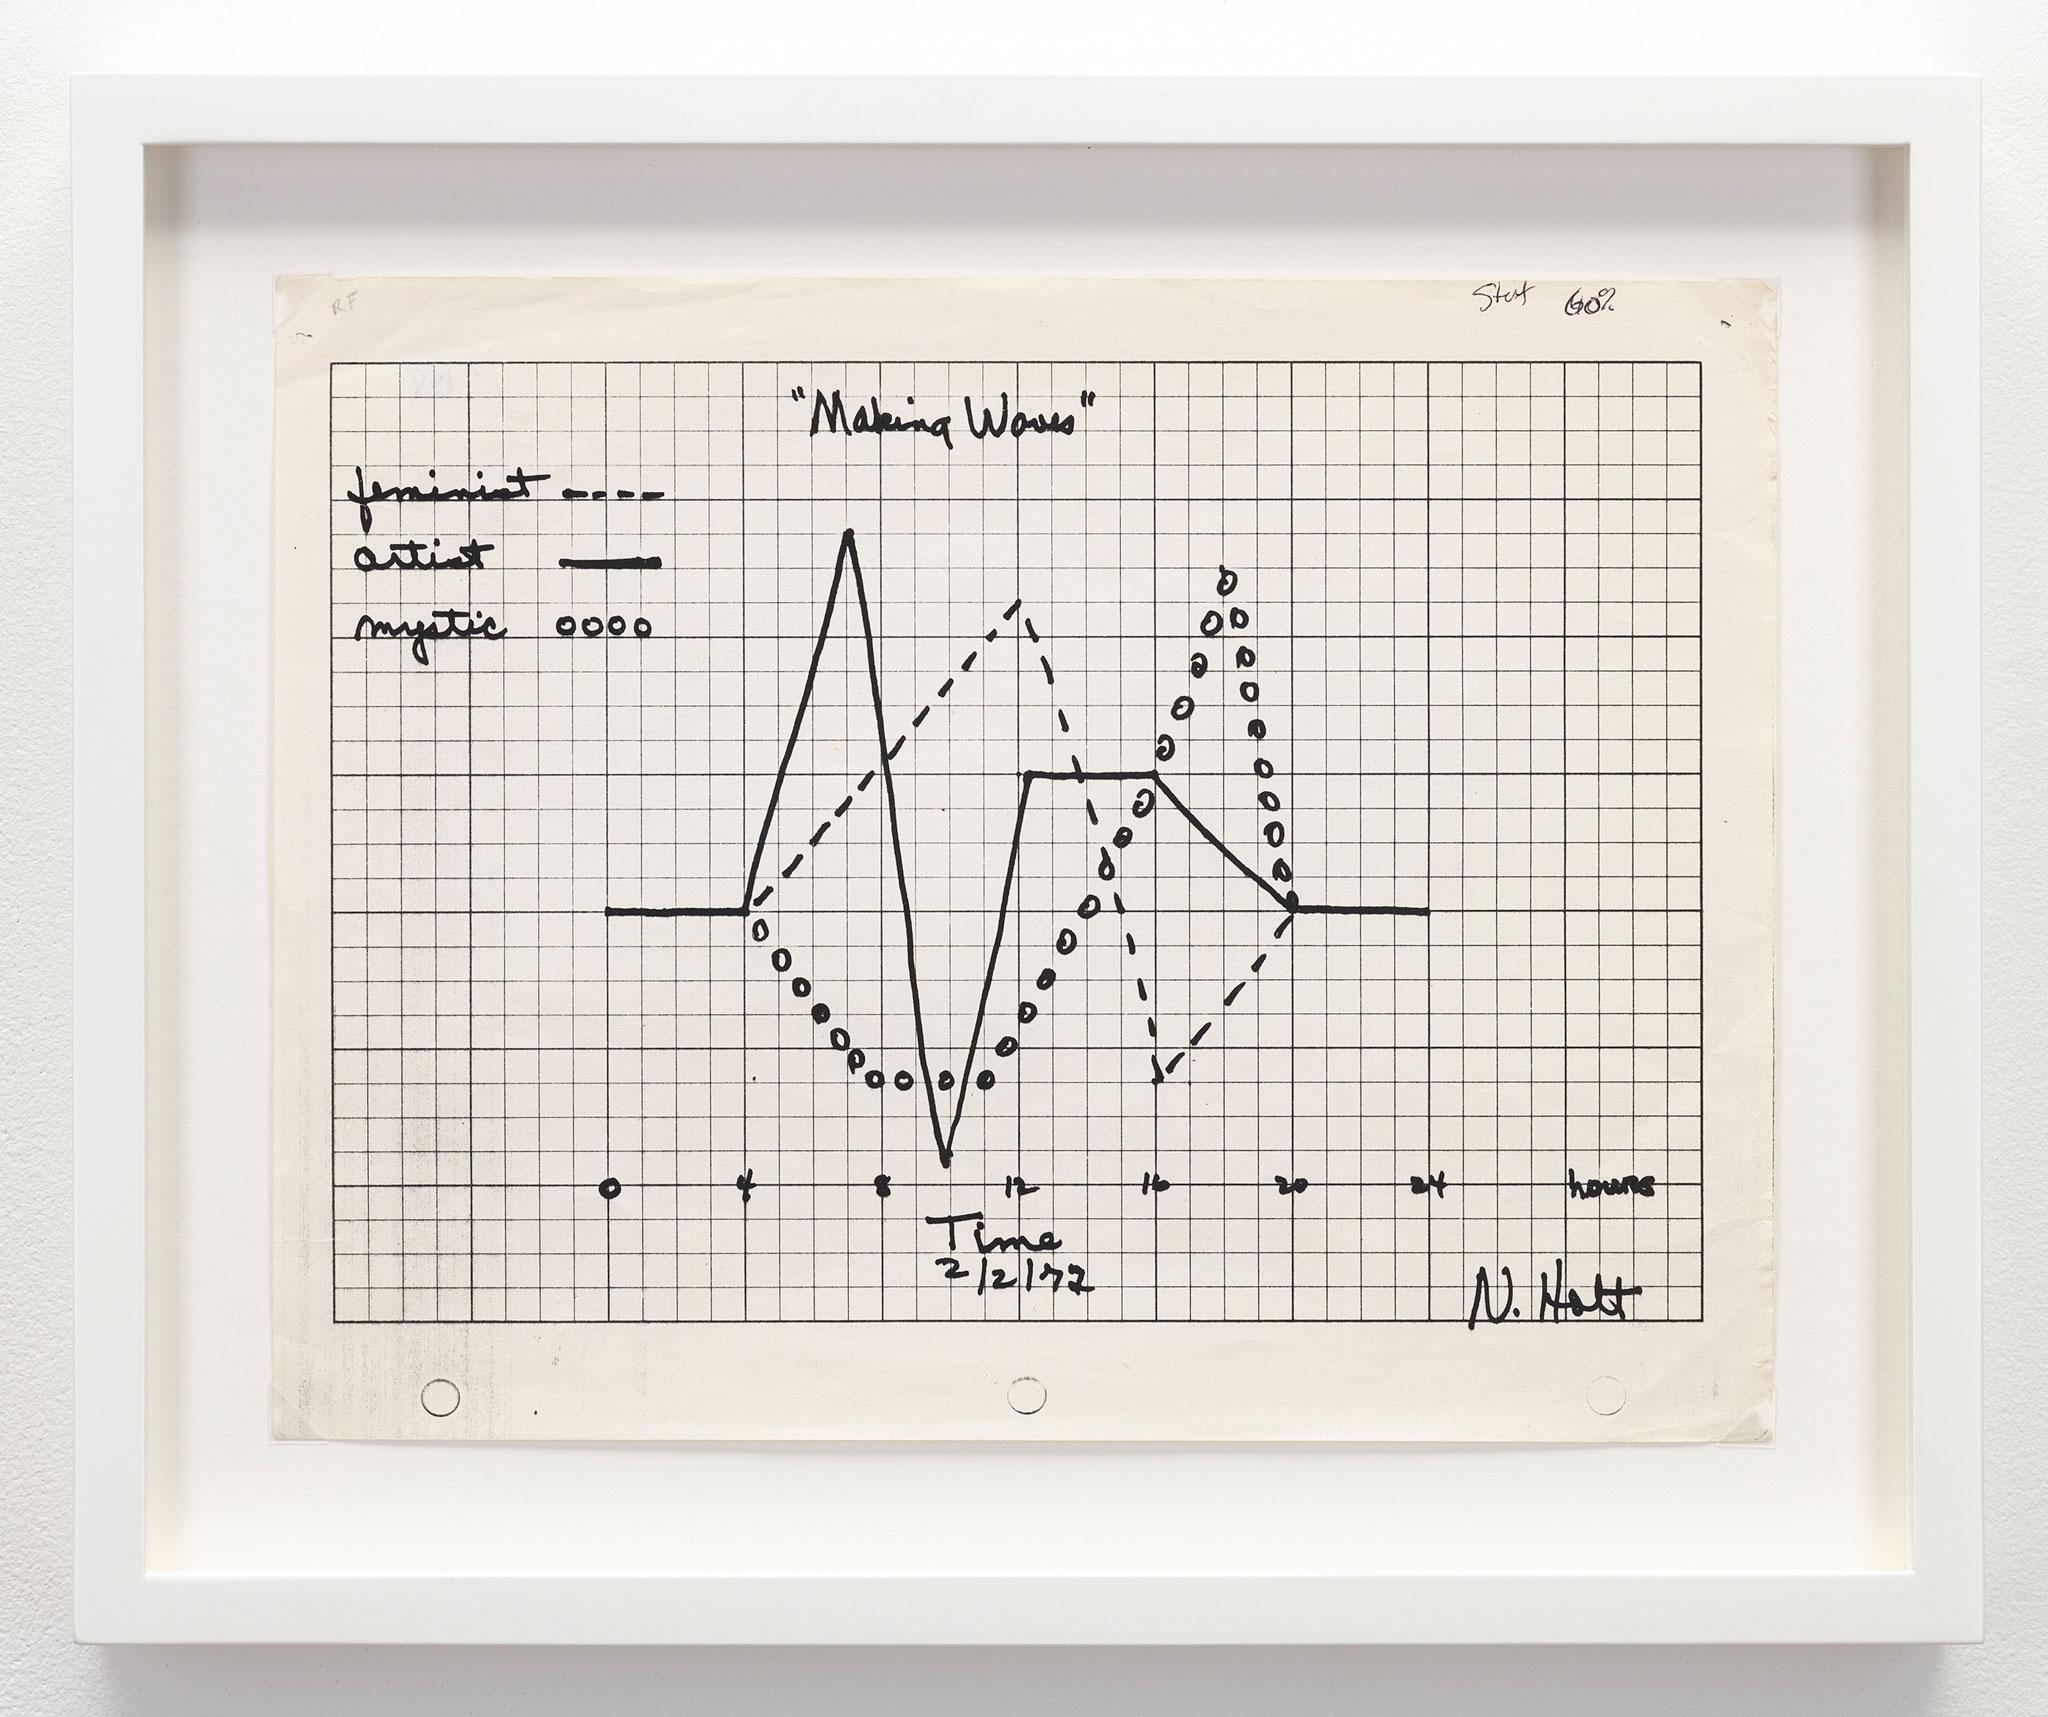 framed ink drawing on graph paper depicting three intersecting lines as that trace Holt's identity as a "feminist" "mystic" and "artist"